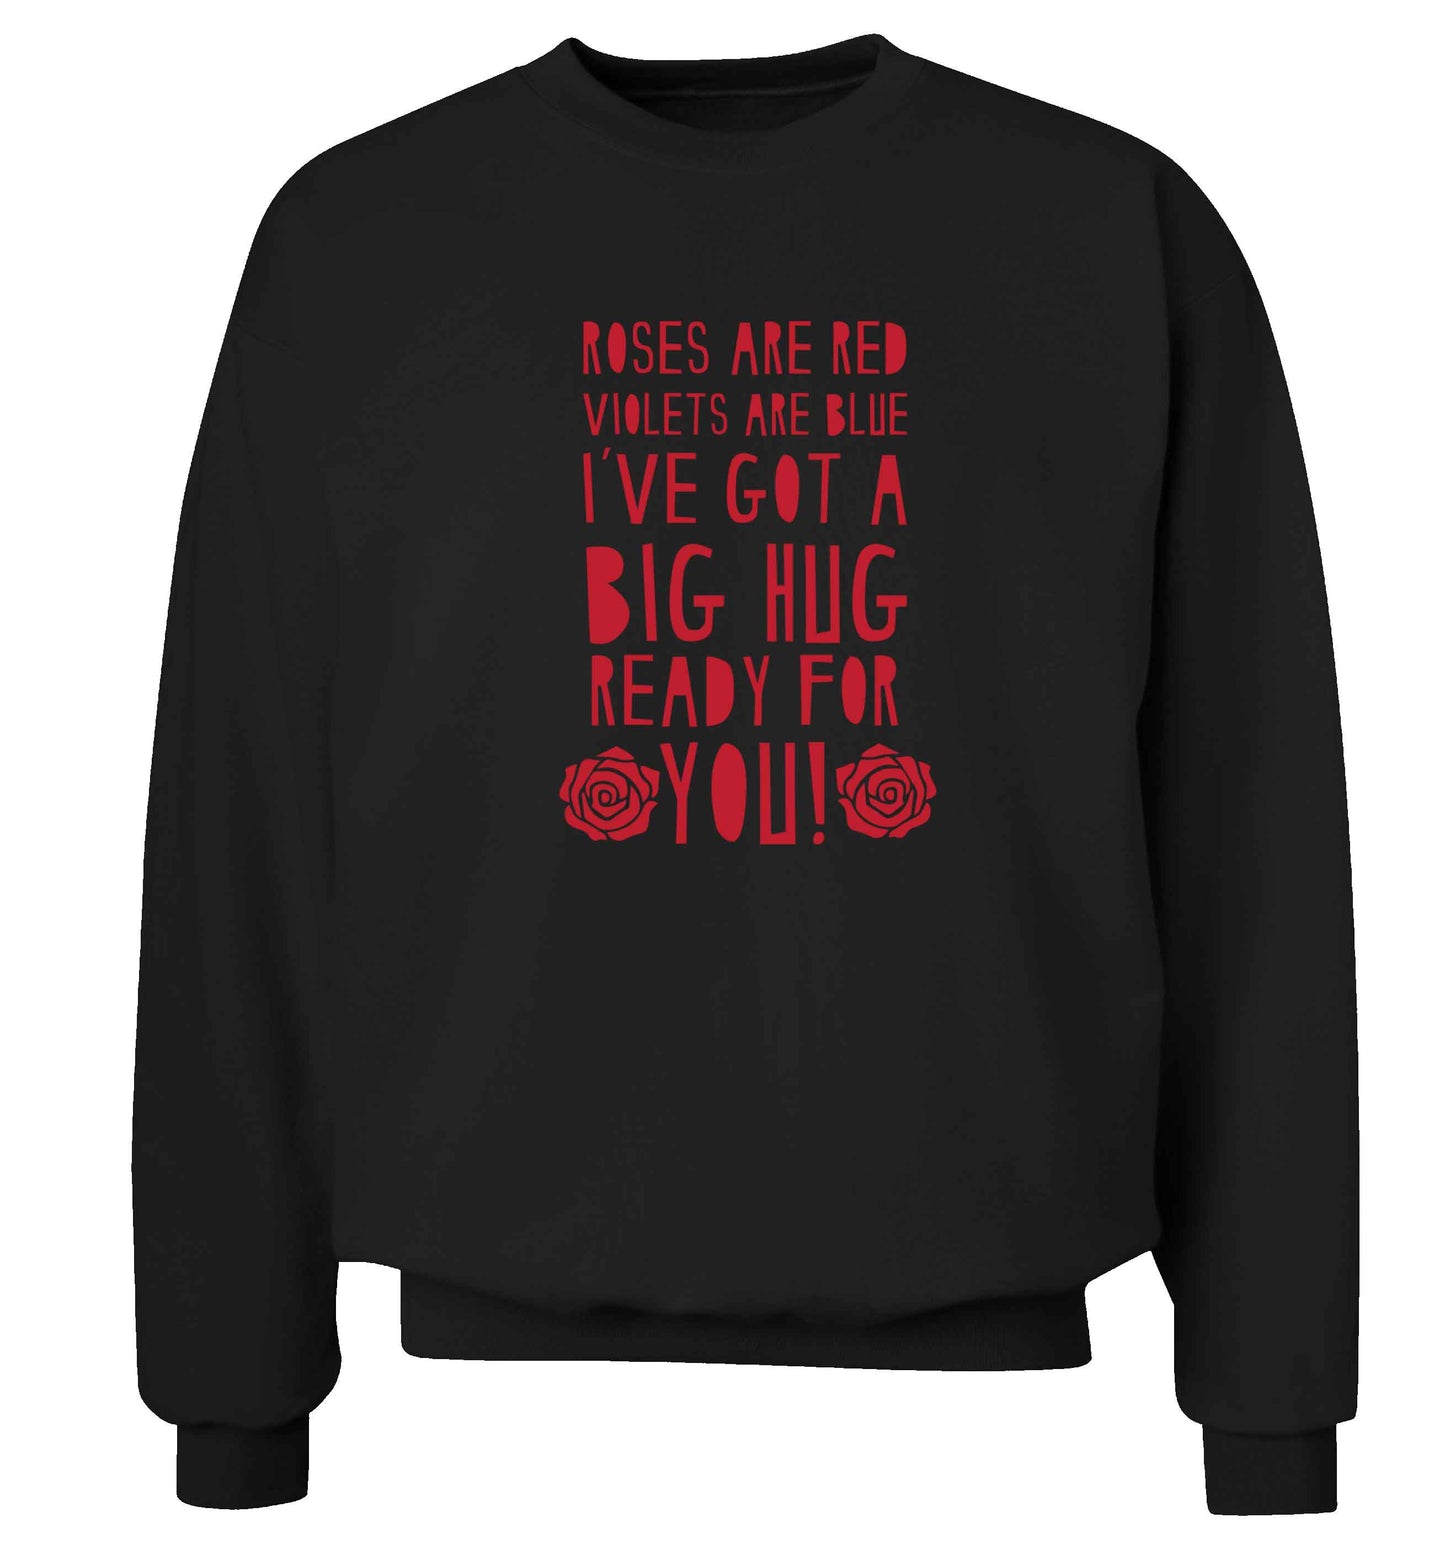 Roses are red violets are blue I've got a big hug coming for you adult's unisex black sweater 2XL